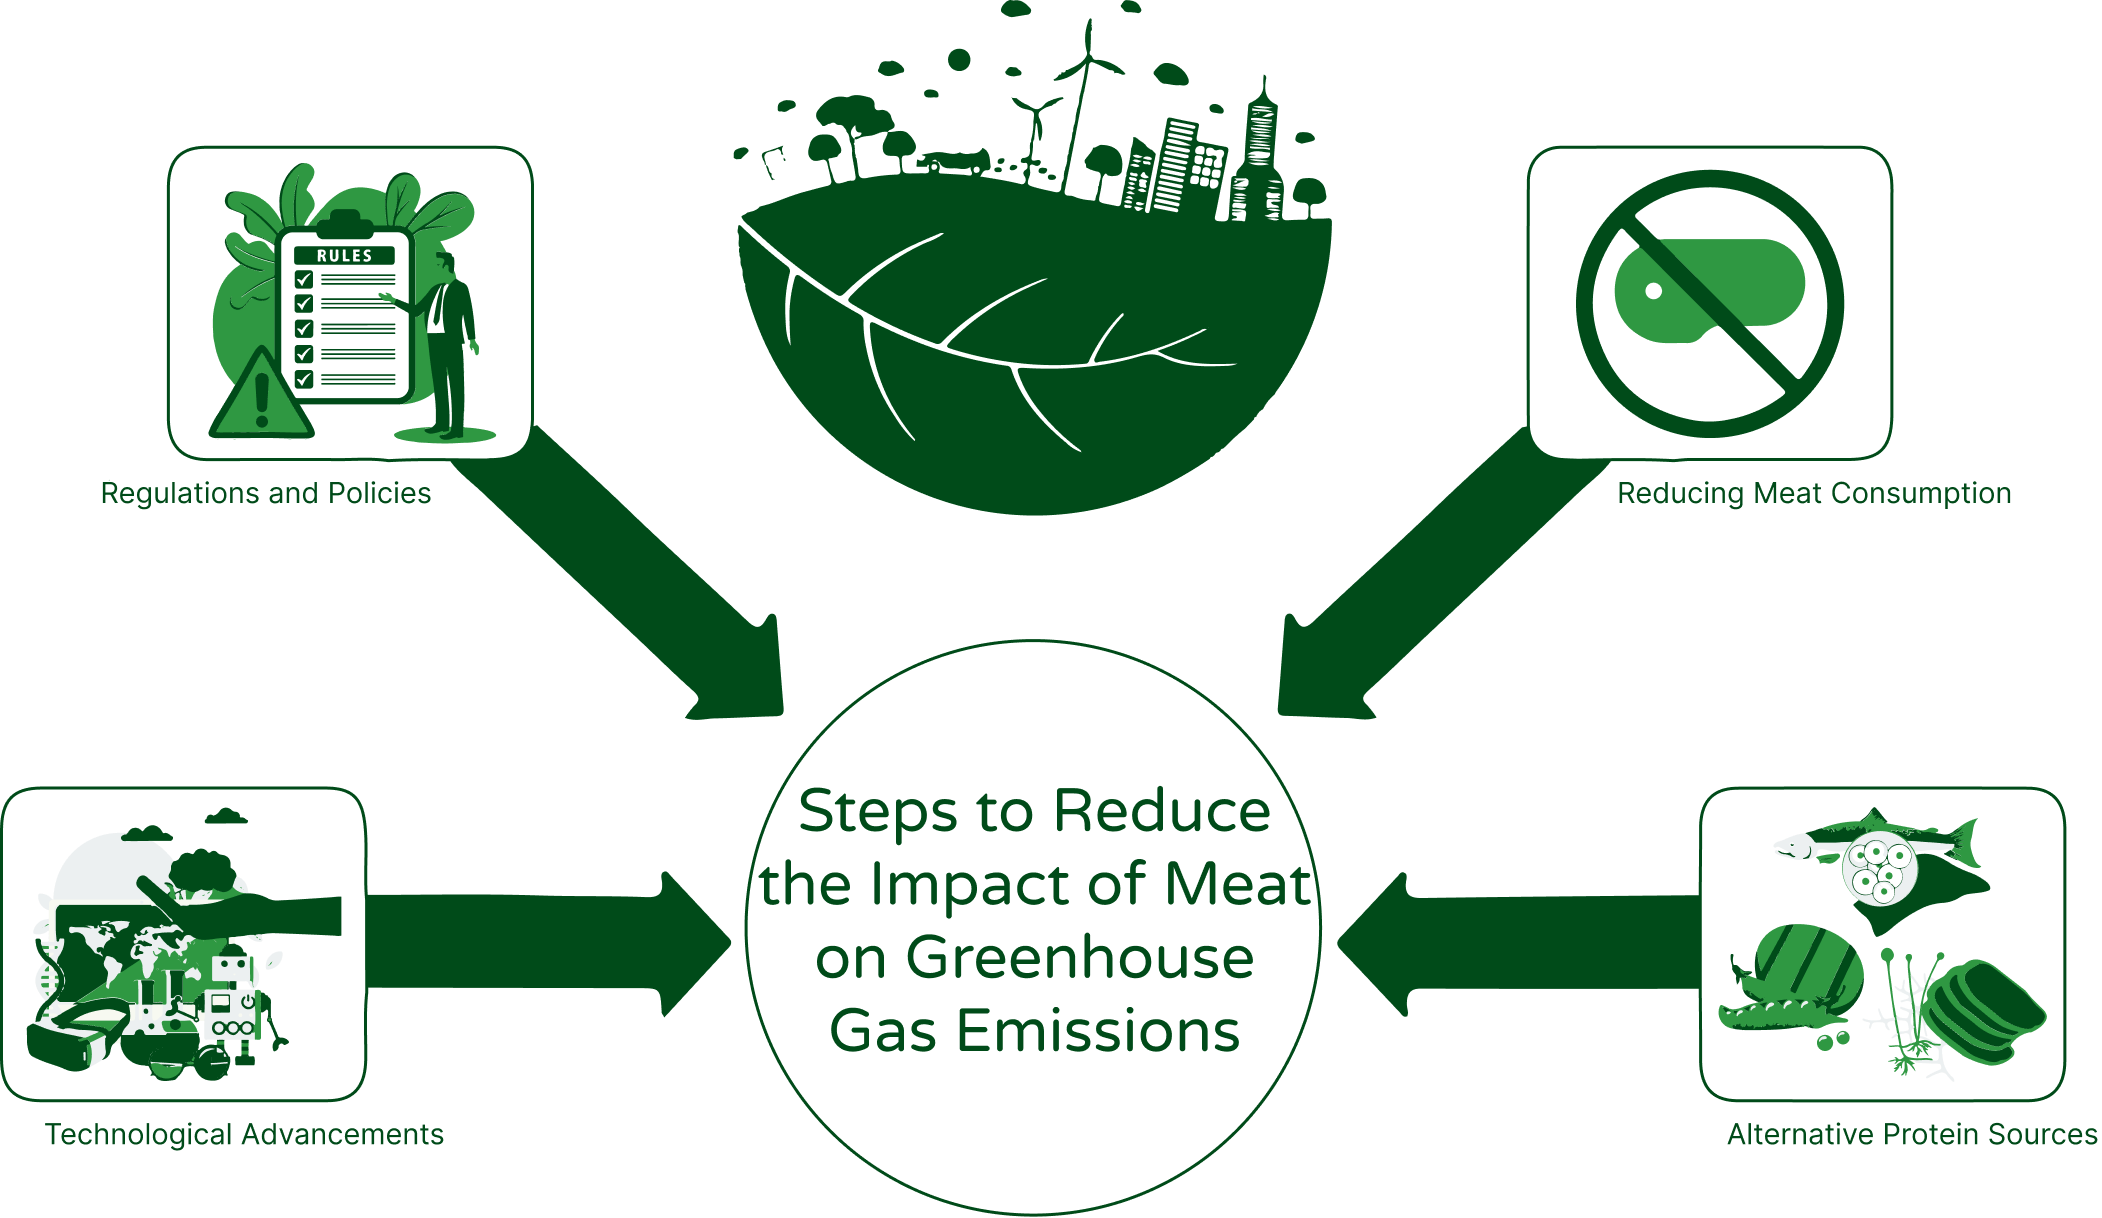 An image illustrating four steps to reduce the impact of meat on greenhouse gas emissions. The visual shows four icons, each representing a different step. The first icon shows a plate with a smaller portion of meat, representing reducing meat consumption. The second icon shows a plant-based burger, representing alternative protein sources. The third icon shows a piece of paper with regulations written on it, representing regulations and policies. The fourth icon shows a factory with a wind turbine, representing technological advancements. The image highlights the various strategies that can be employed to reduce the environmental impact of meat consumption.